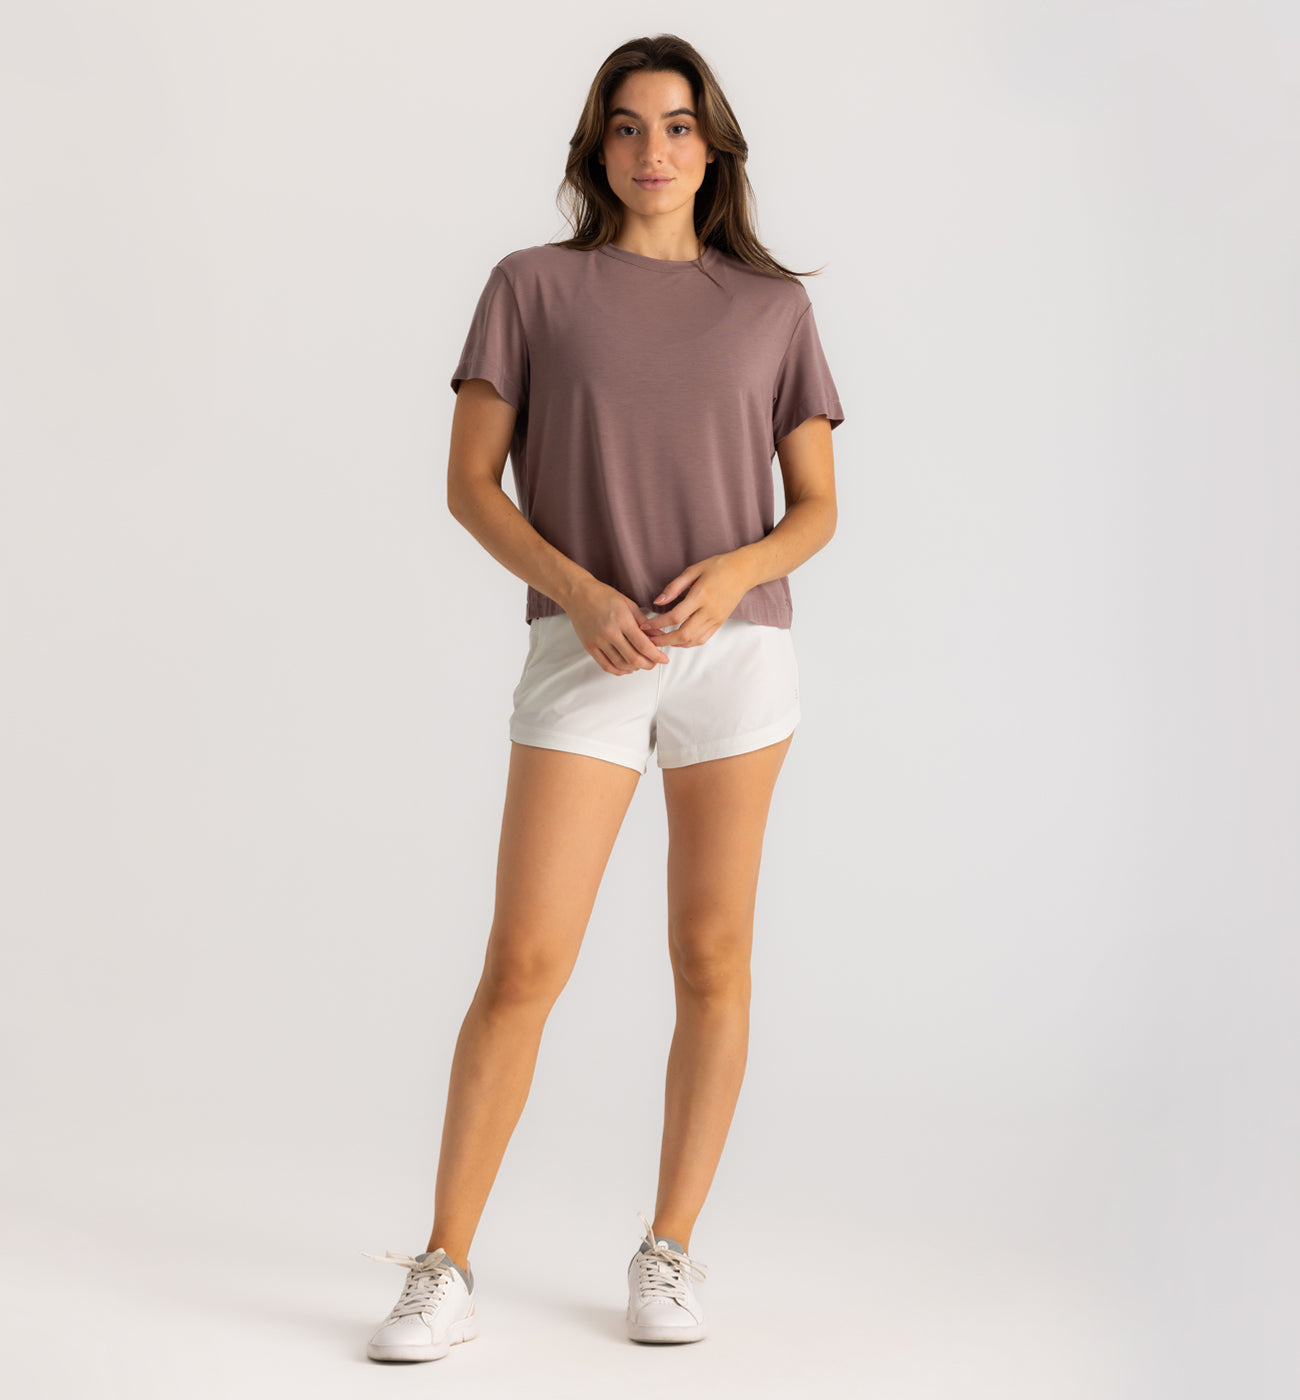 Fit Review Friday! Store Try Ons. Breeze By Short Sleeve, Hotty